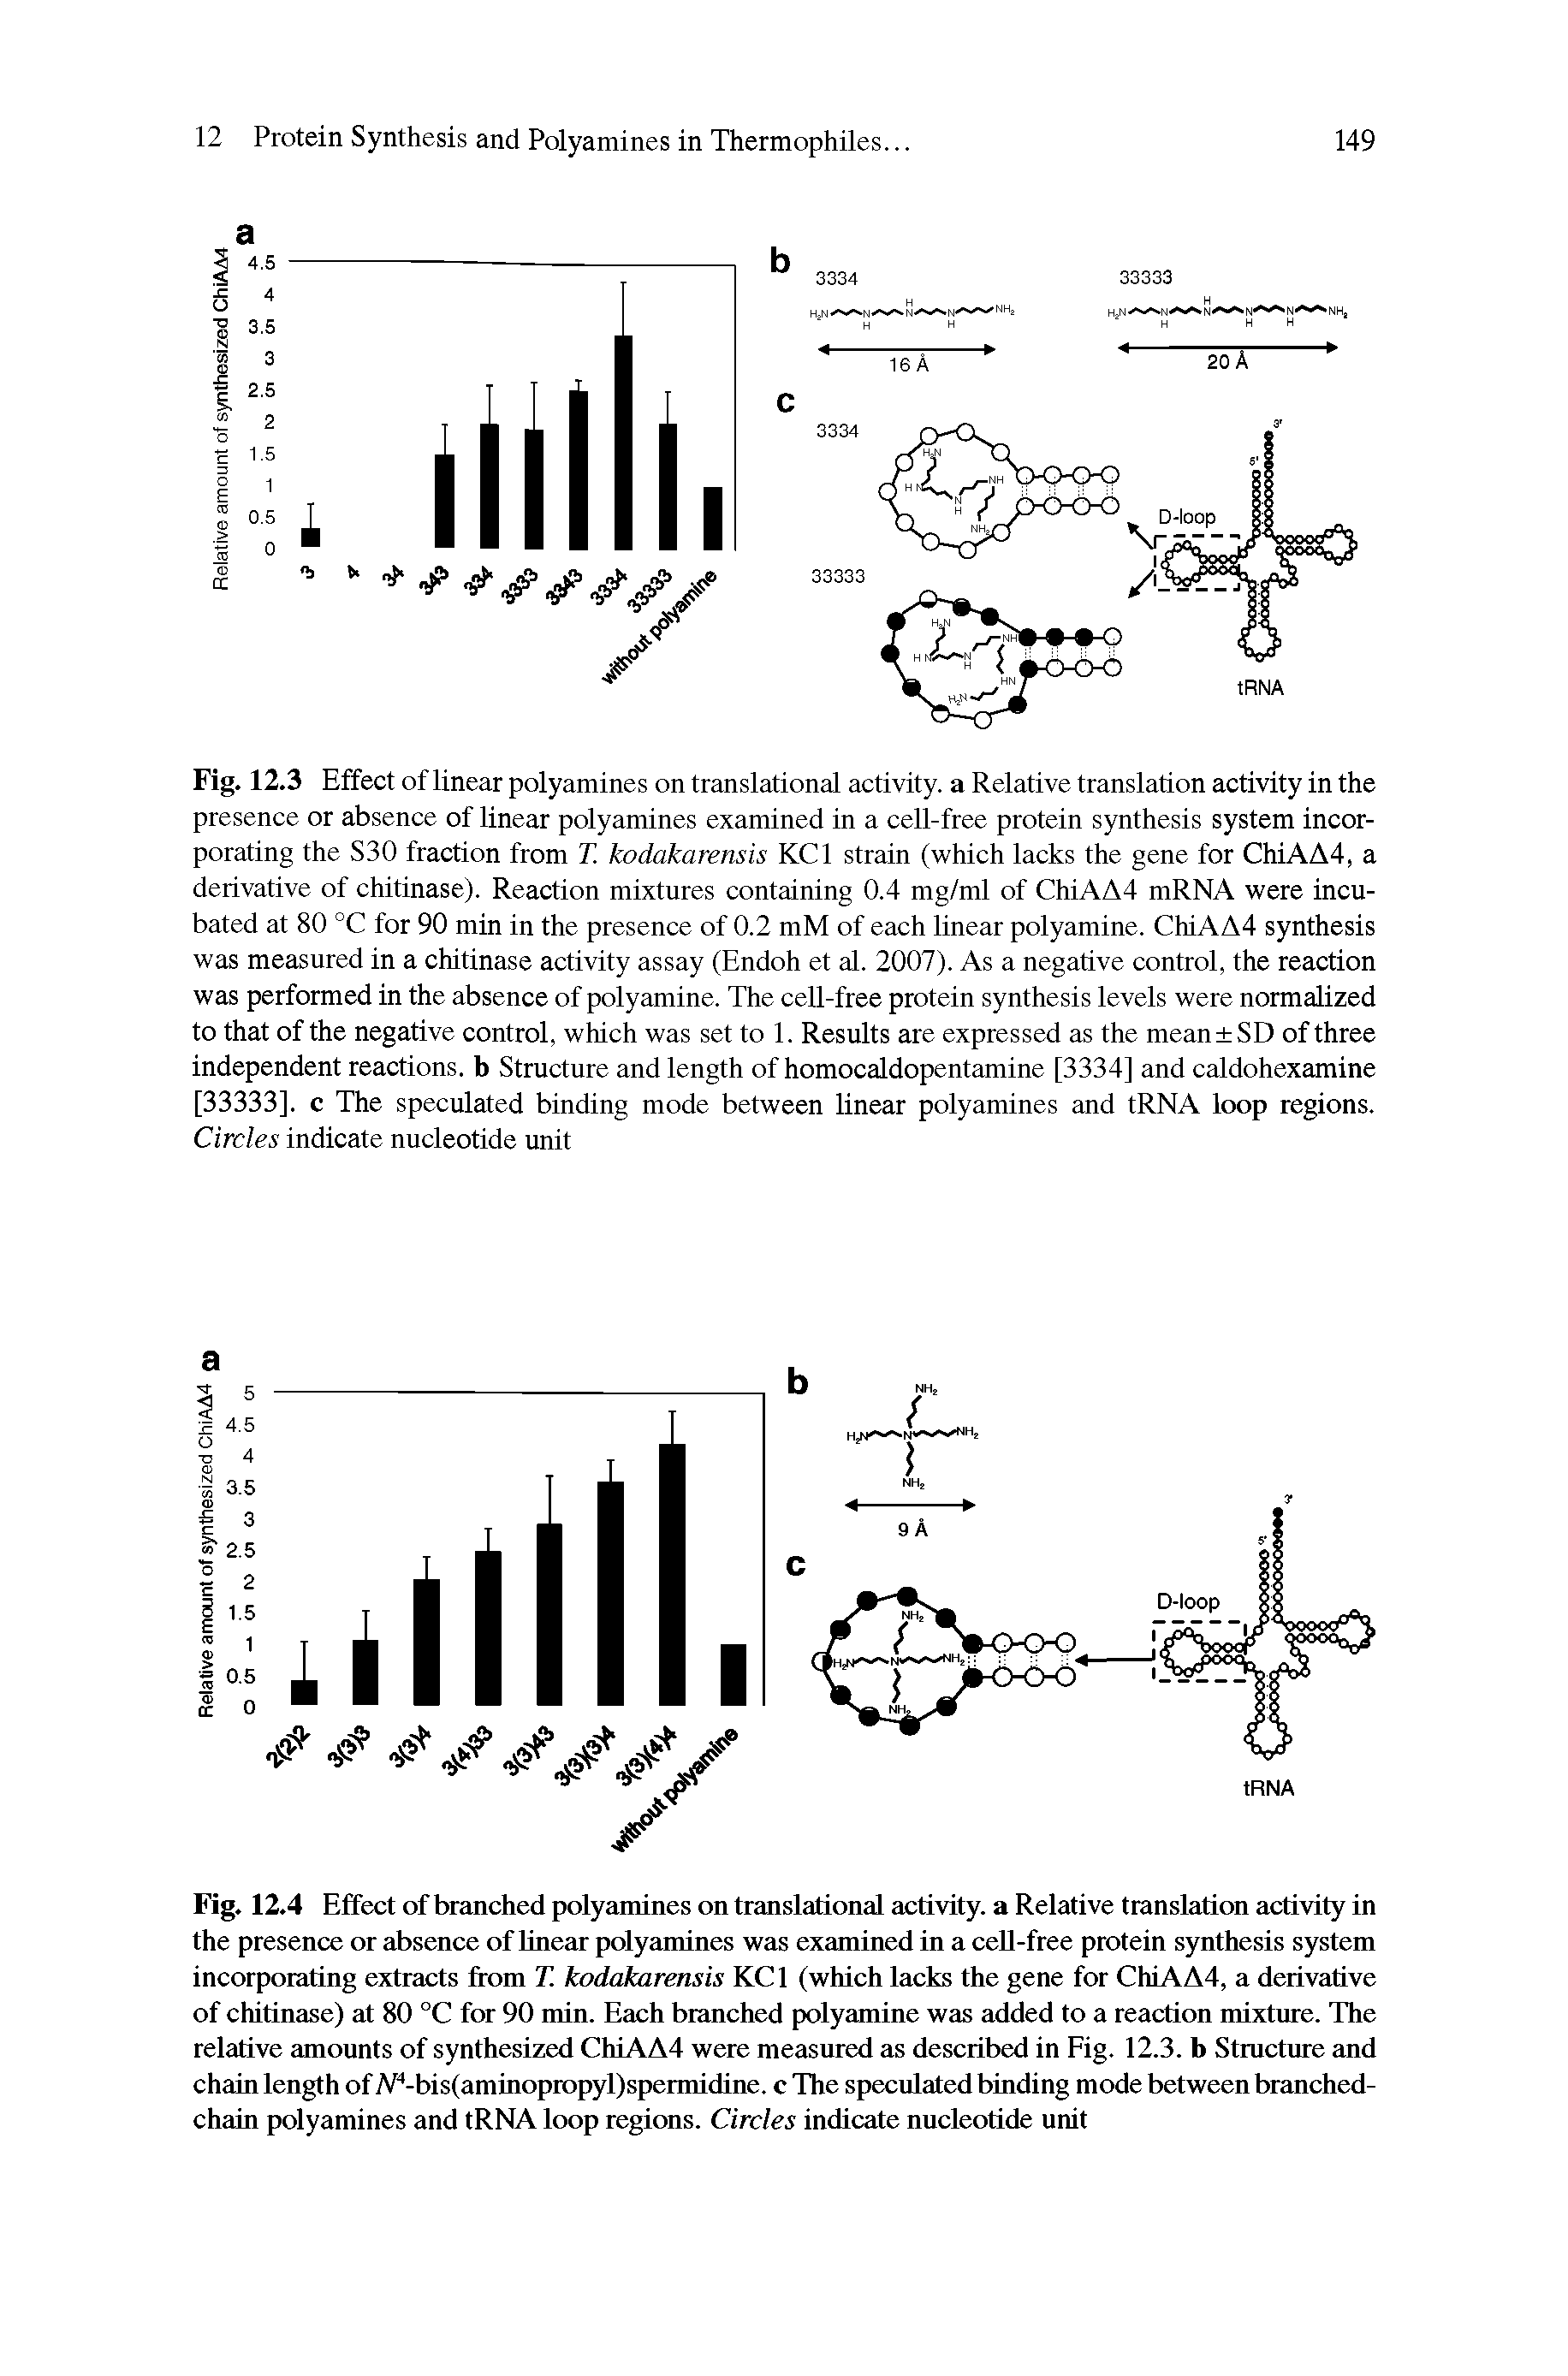 Fig. 12.4 Effect of branched polyamines on translational activity, a Relative translation activity in the presence or absence of linear polyamines was examined in a cell-free protein synthesis system incorporating extracts from T. kodakarensis KCl (which lacks the gene for ChiAA4, a derivative of chitinase) at 80 °C for 90 min. Each branched polyamine was added to a reaction mixture. The relative amounts of synthesized ChiAA4 were measured as described in Eig. 12.3. b Structure and chain length of A -bis(aminopropyl)spermidine. c The speculated binding mode between branched-chain polyamines and tRNA loop regions. Circles indicate nucleotide unit...